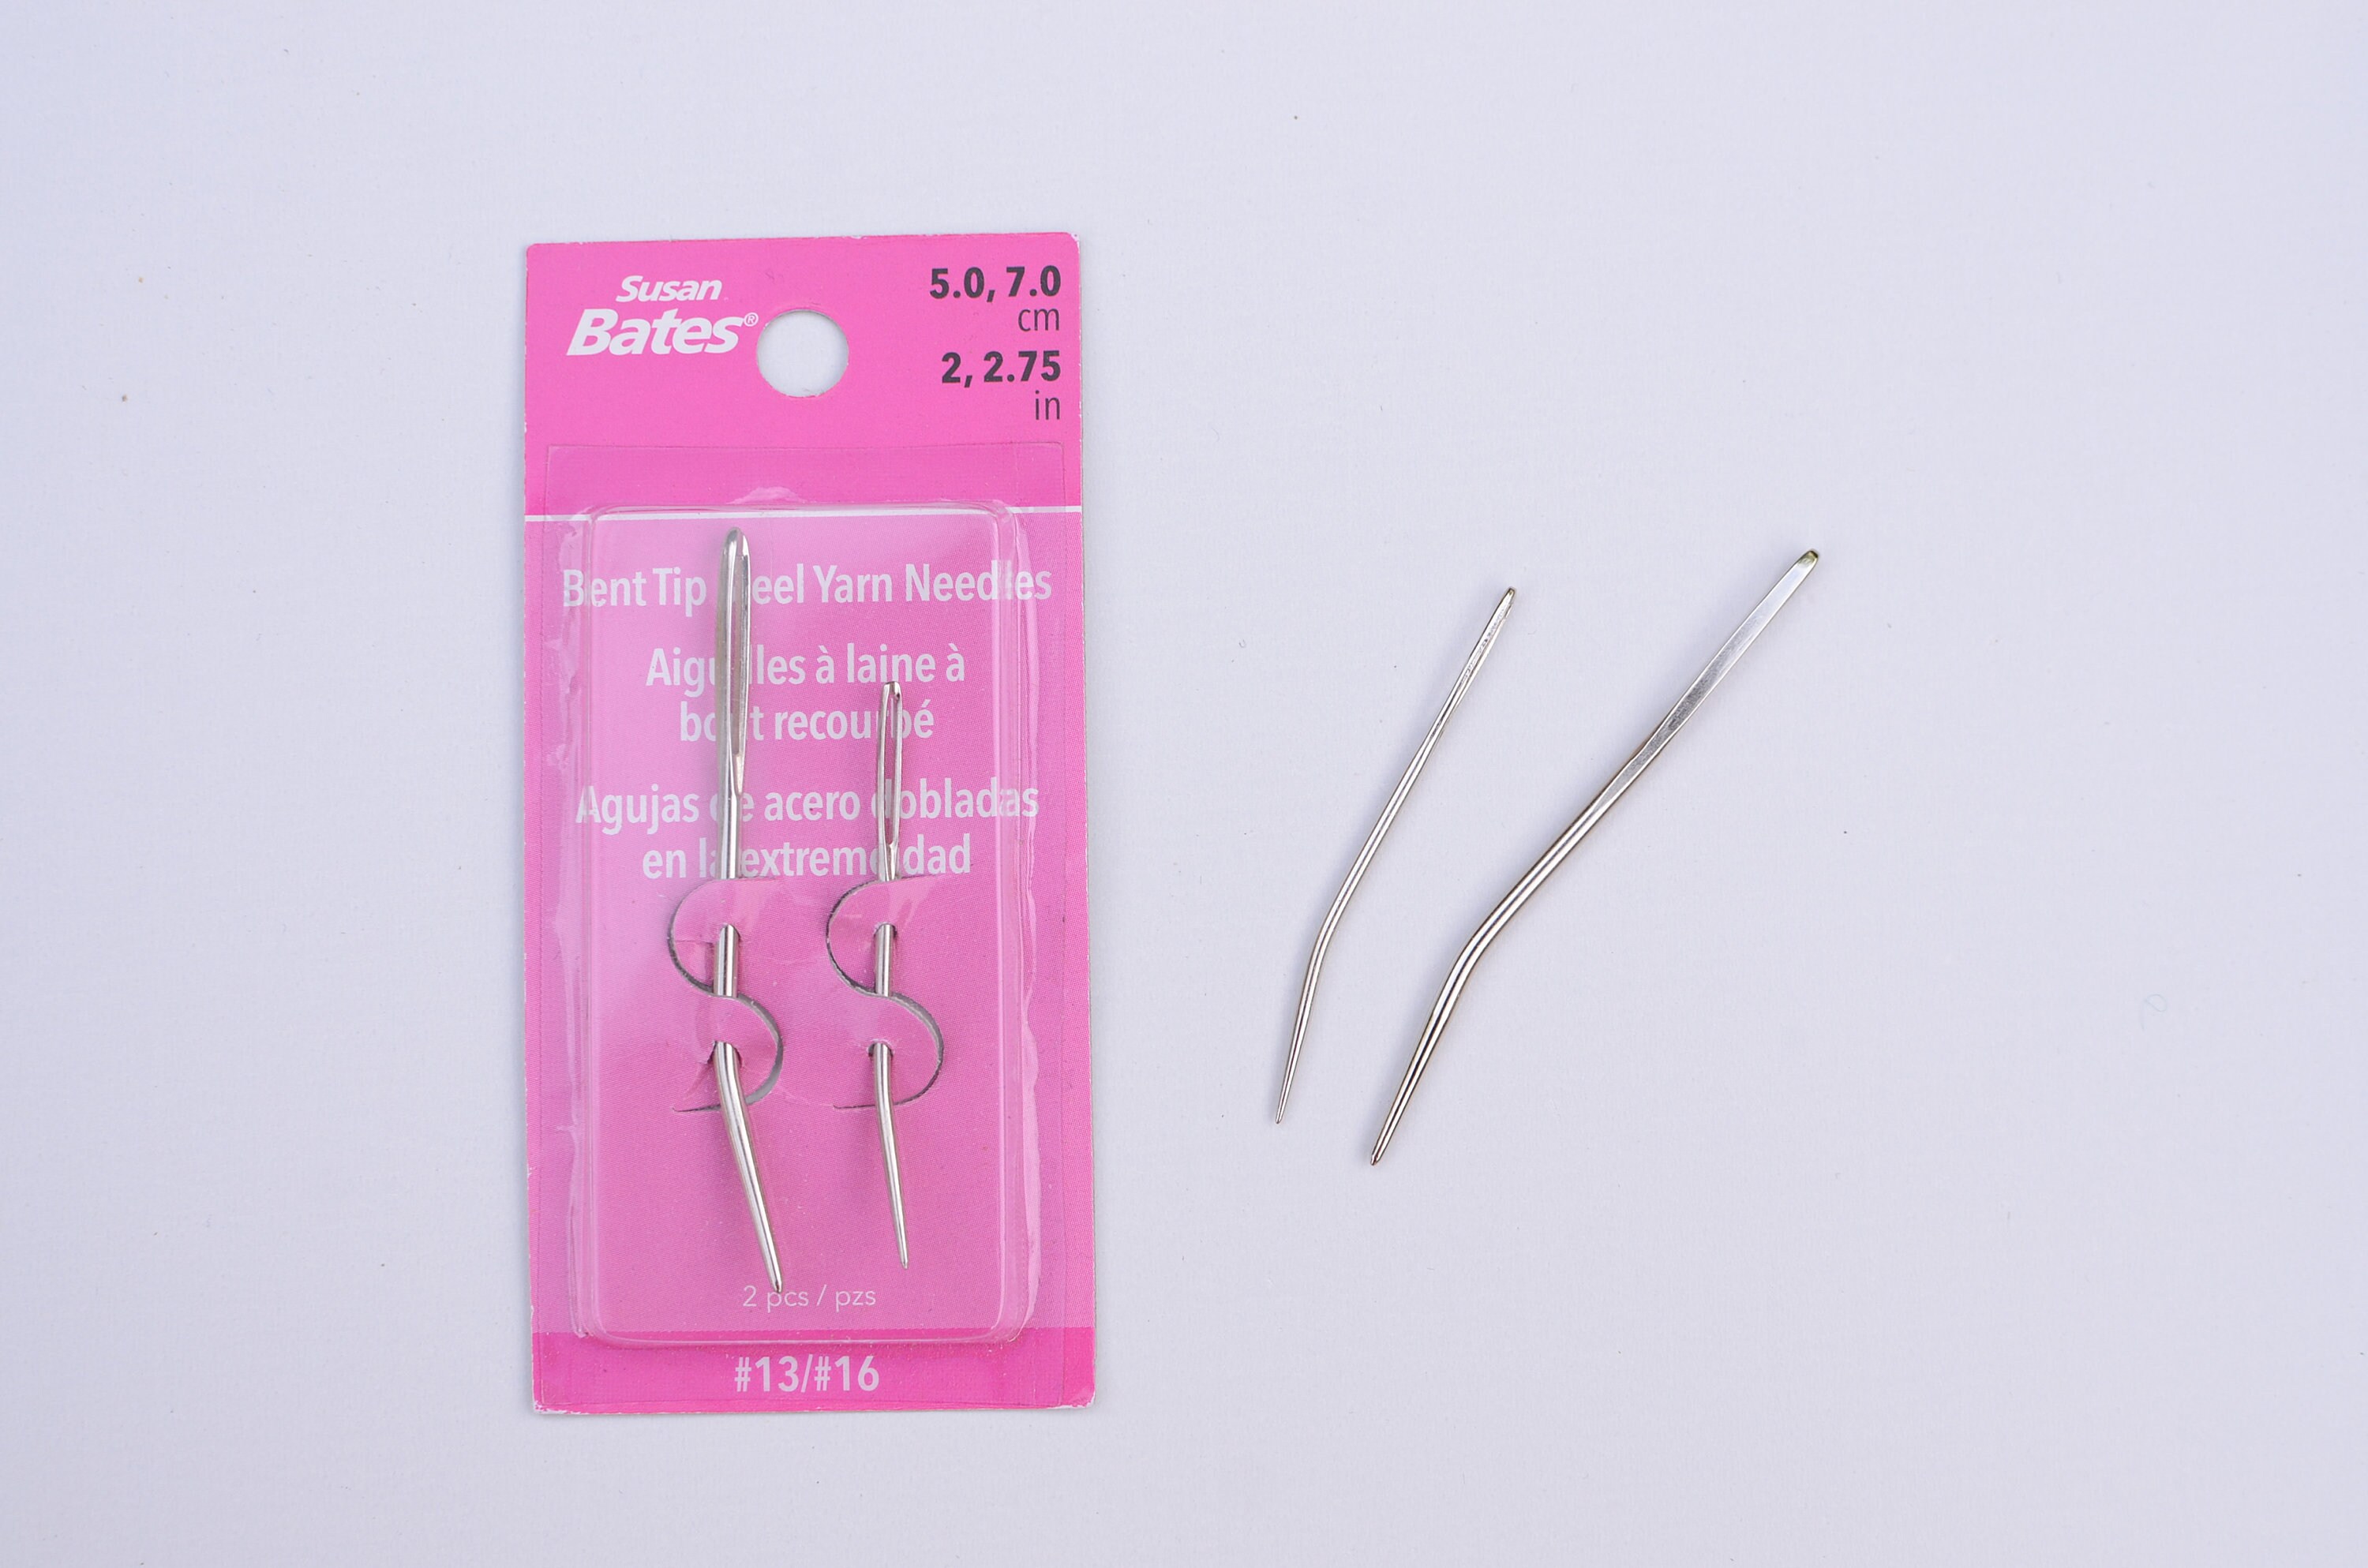 2 Pack Flexy Tapestry Needles for Super Chunky Yarn, Flexible